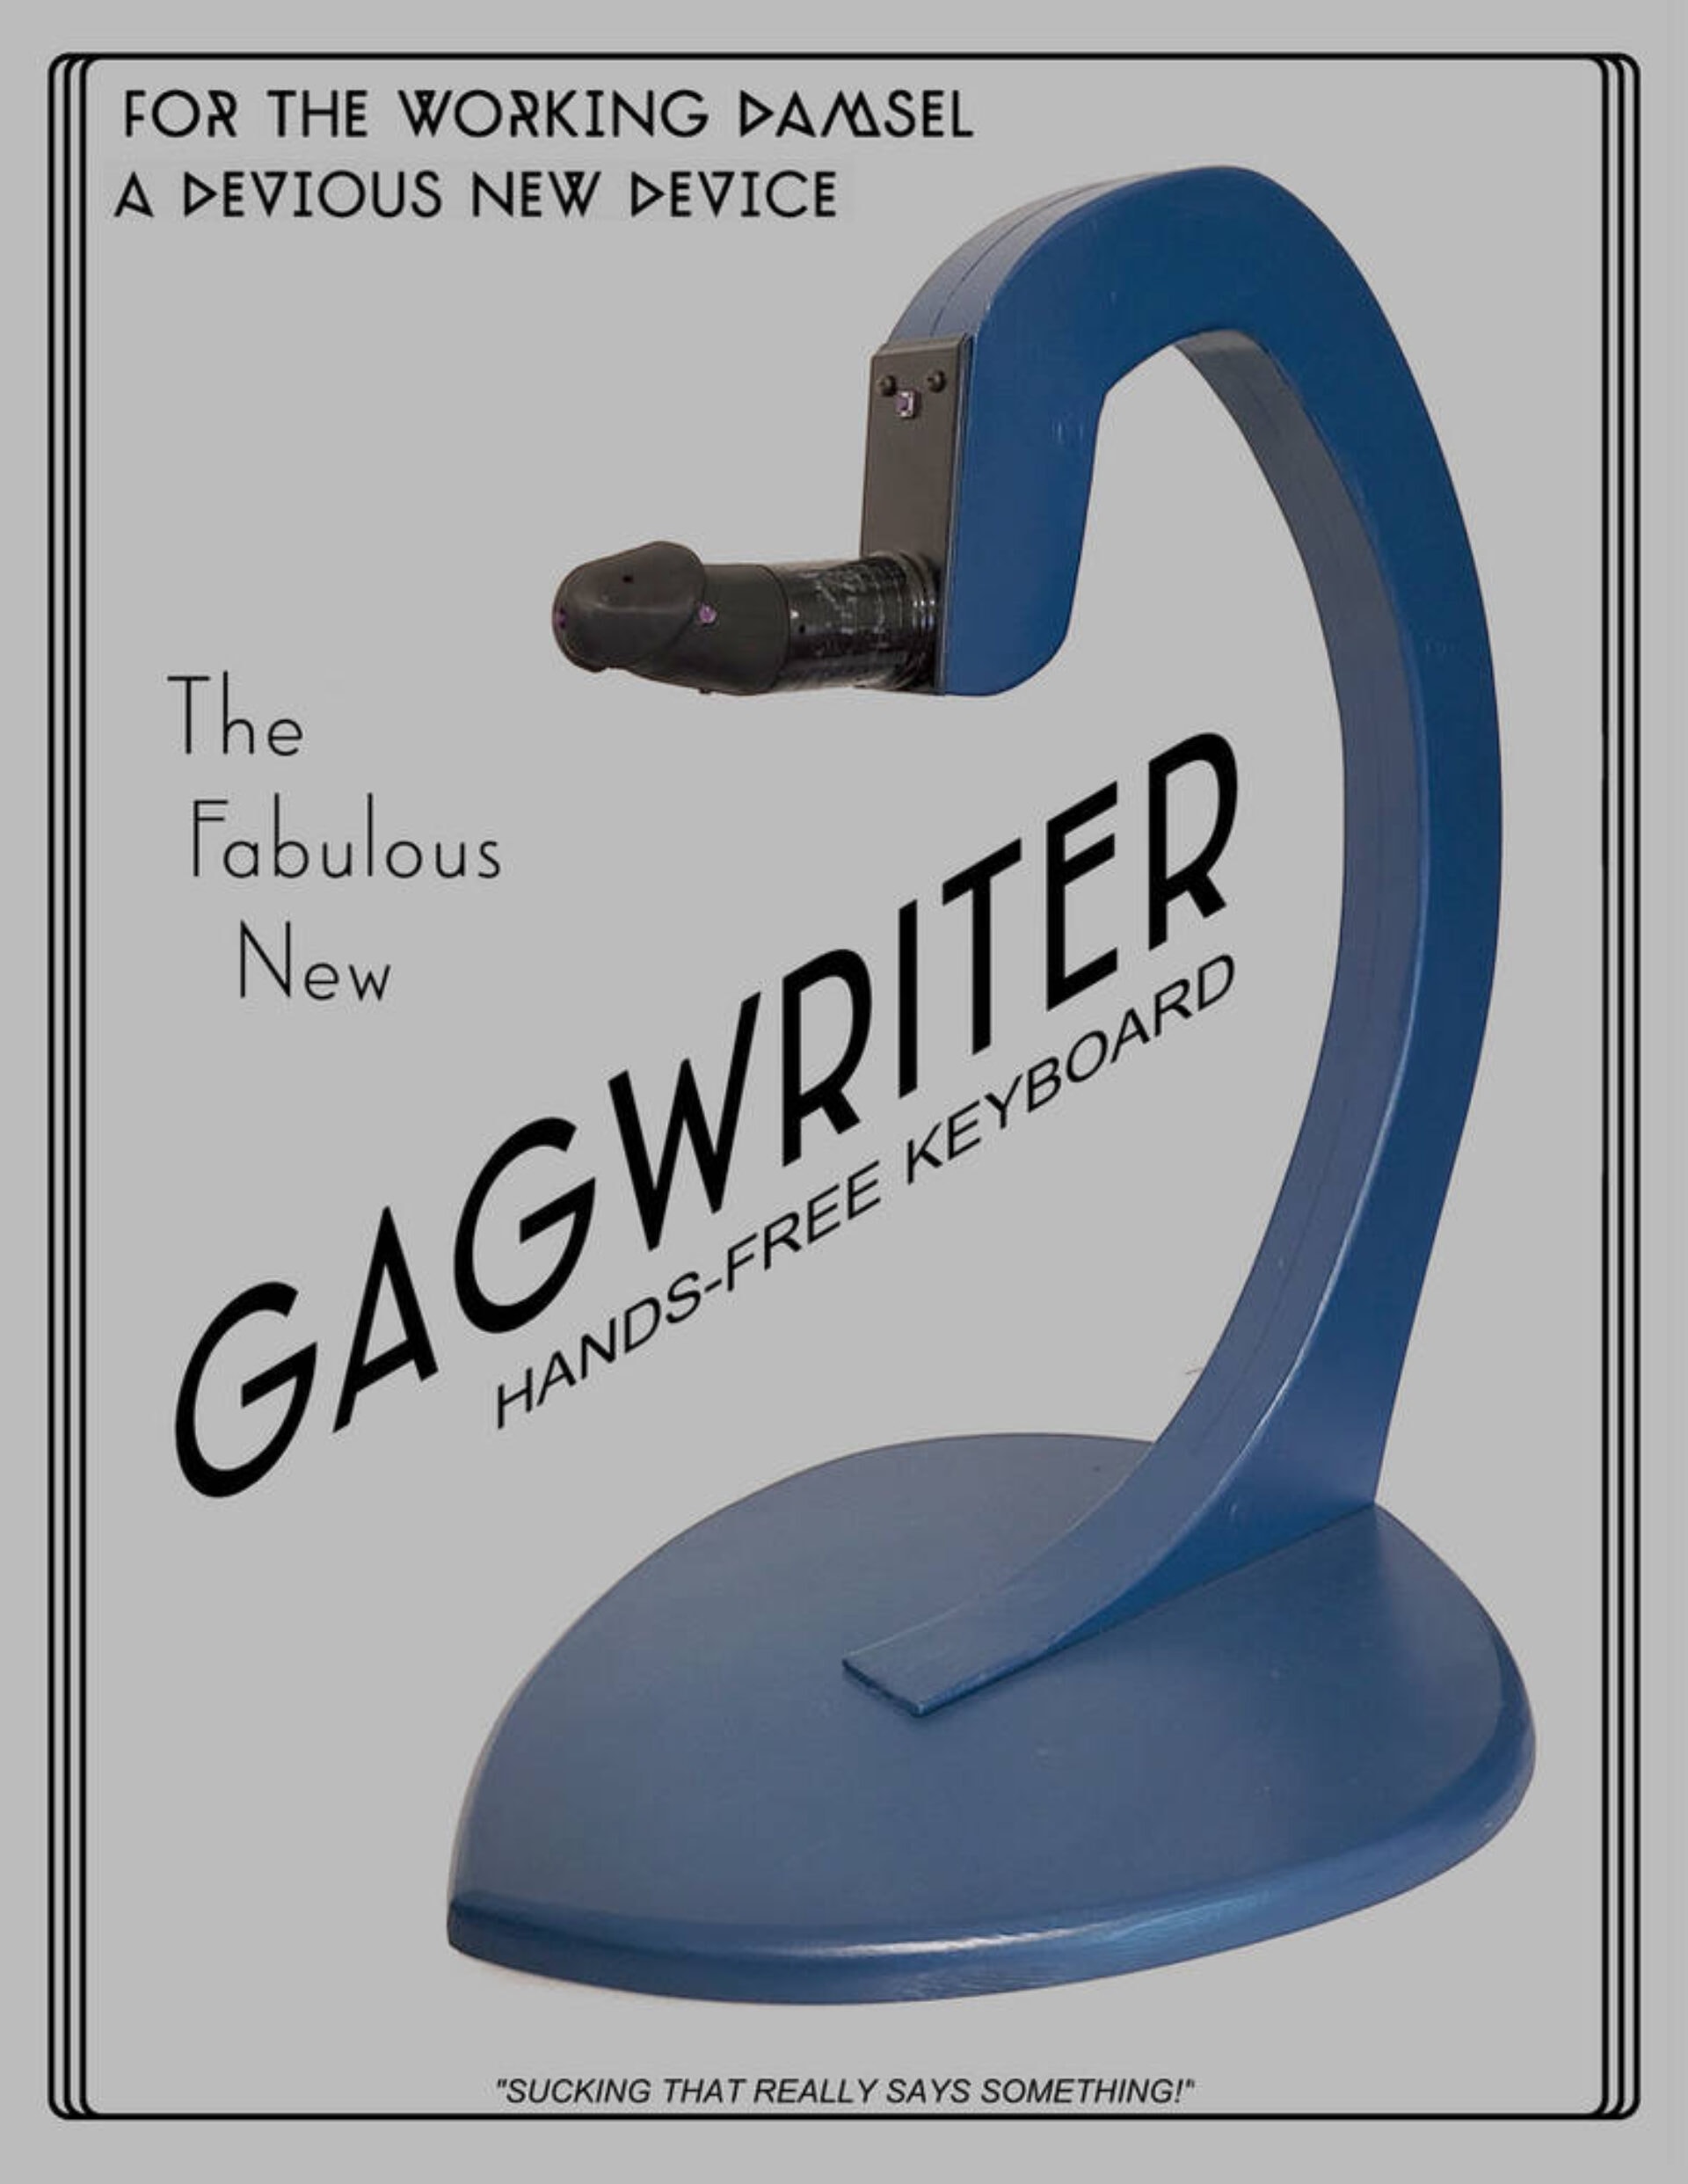 gagwriter keyboard files zip by devious devices dex7d0y pre